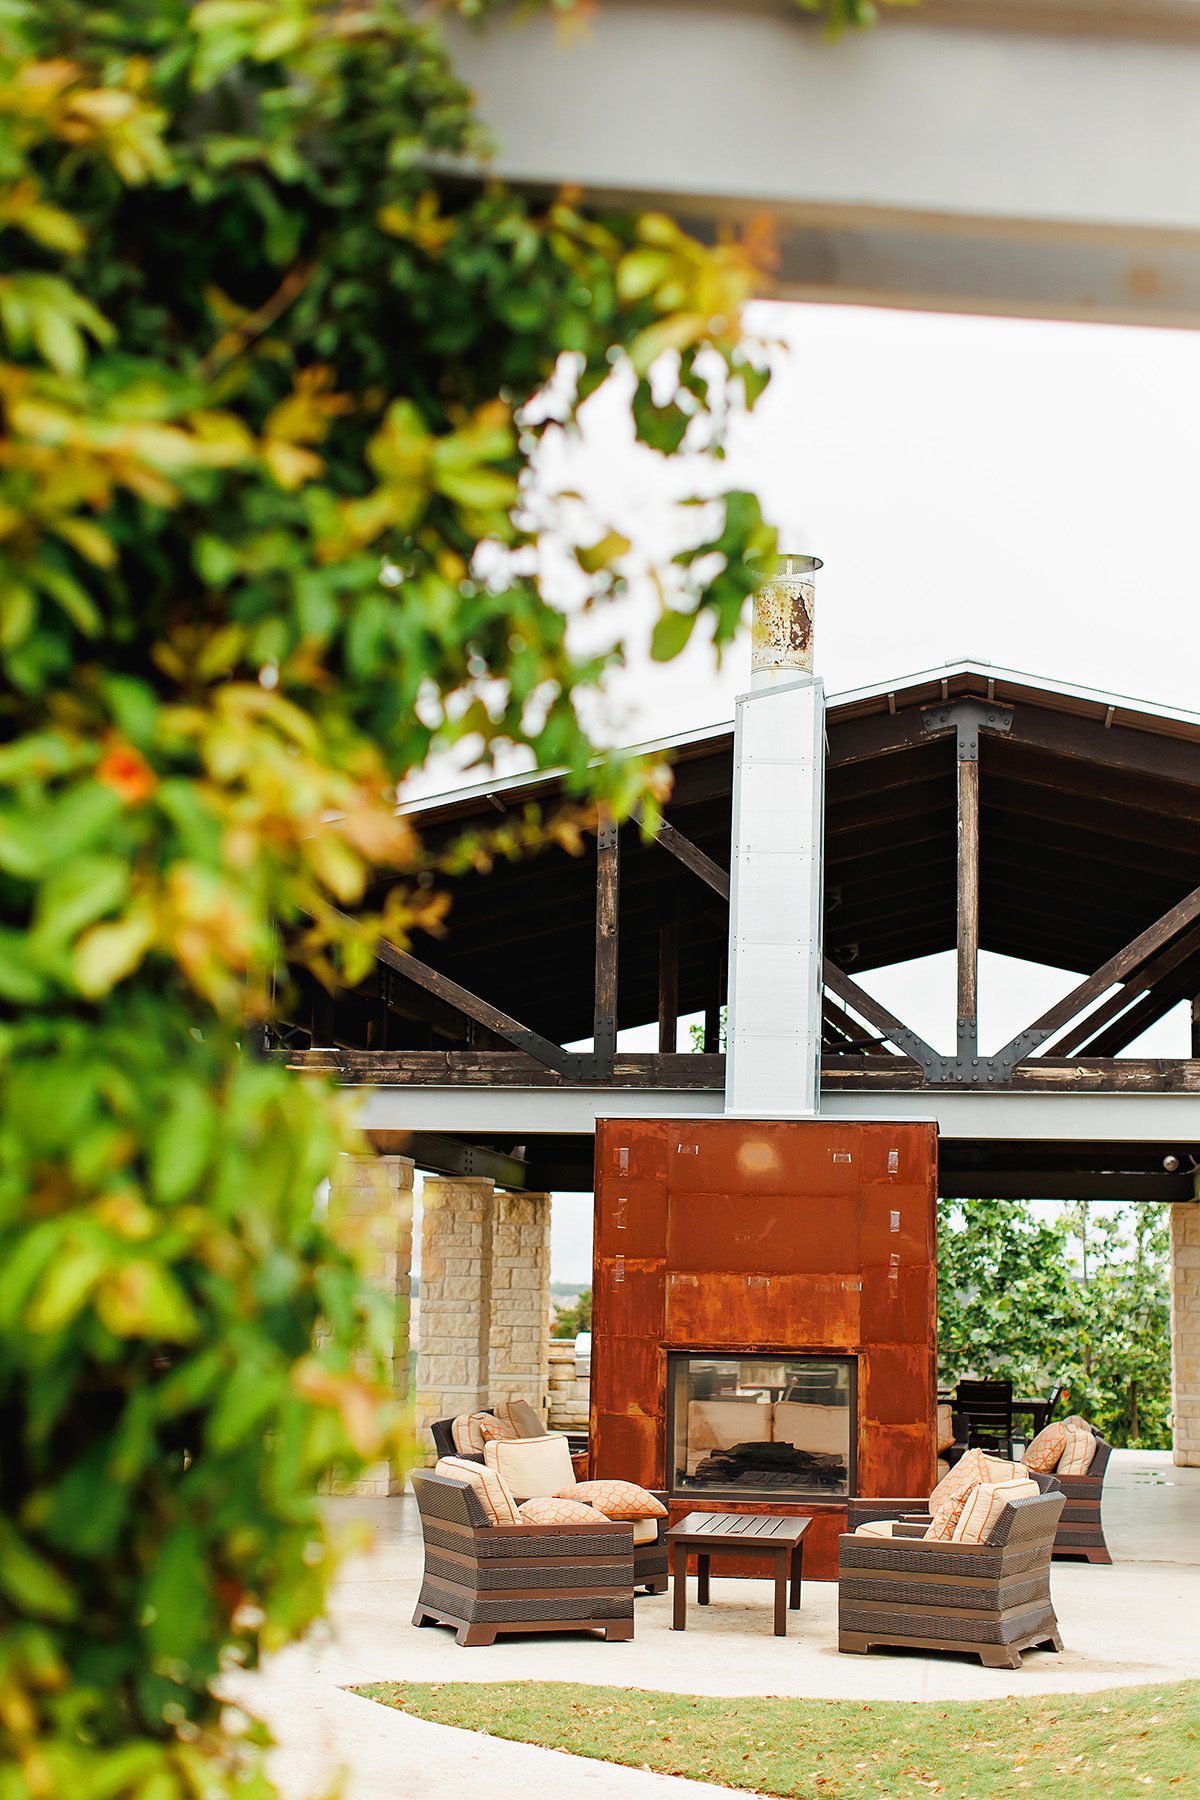 Headwaters community event center fireplace in Dripping Springs, Texas Lauren Clark Realtor with Magnolia Realty in Dripping Springs